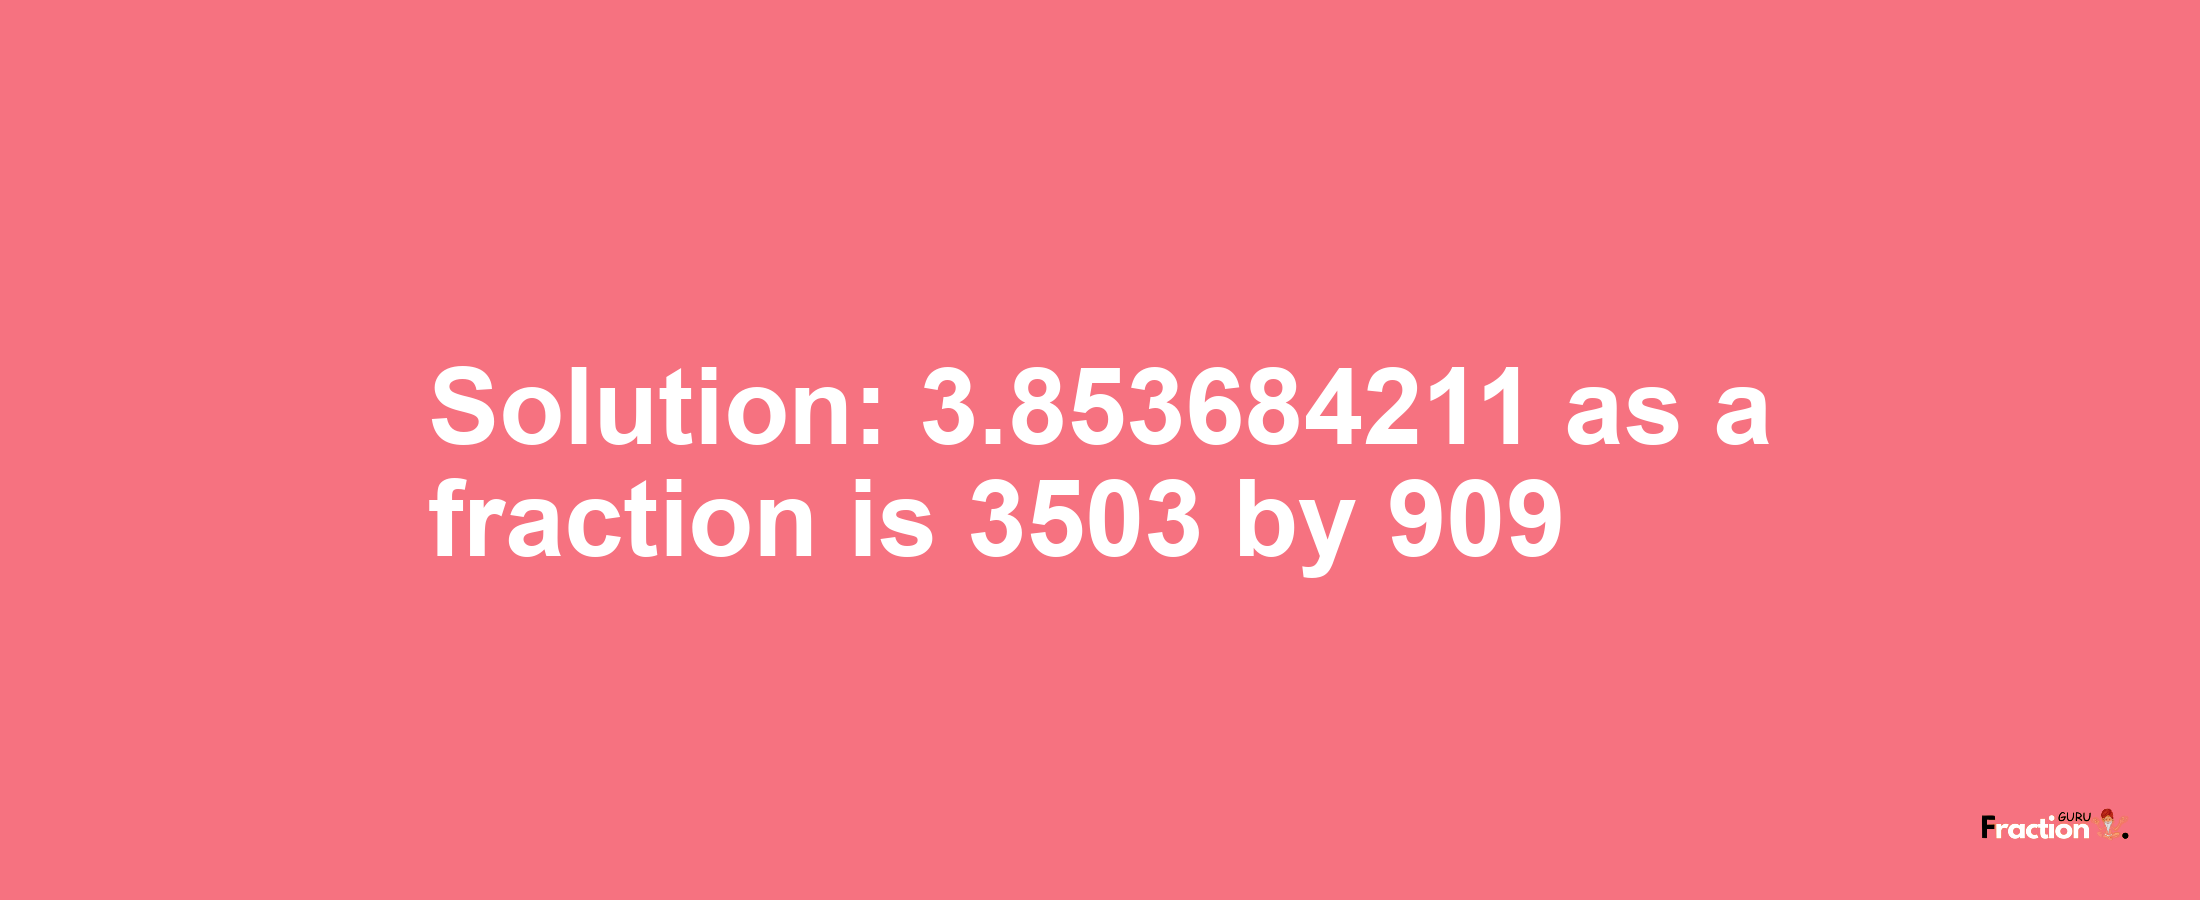 Solution:3.853684211 as a fraction is 3503/909